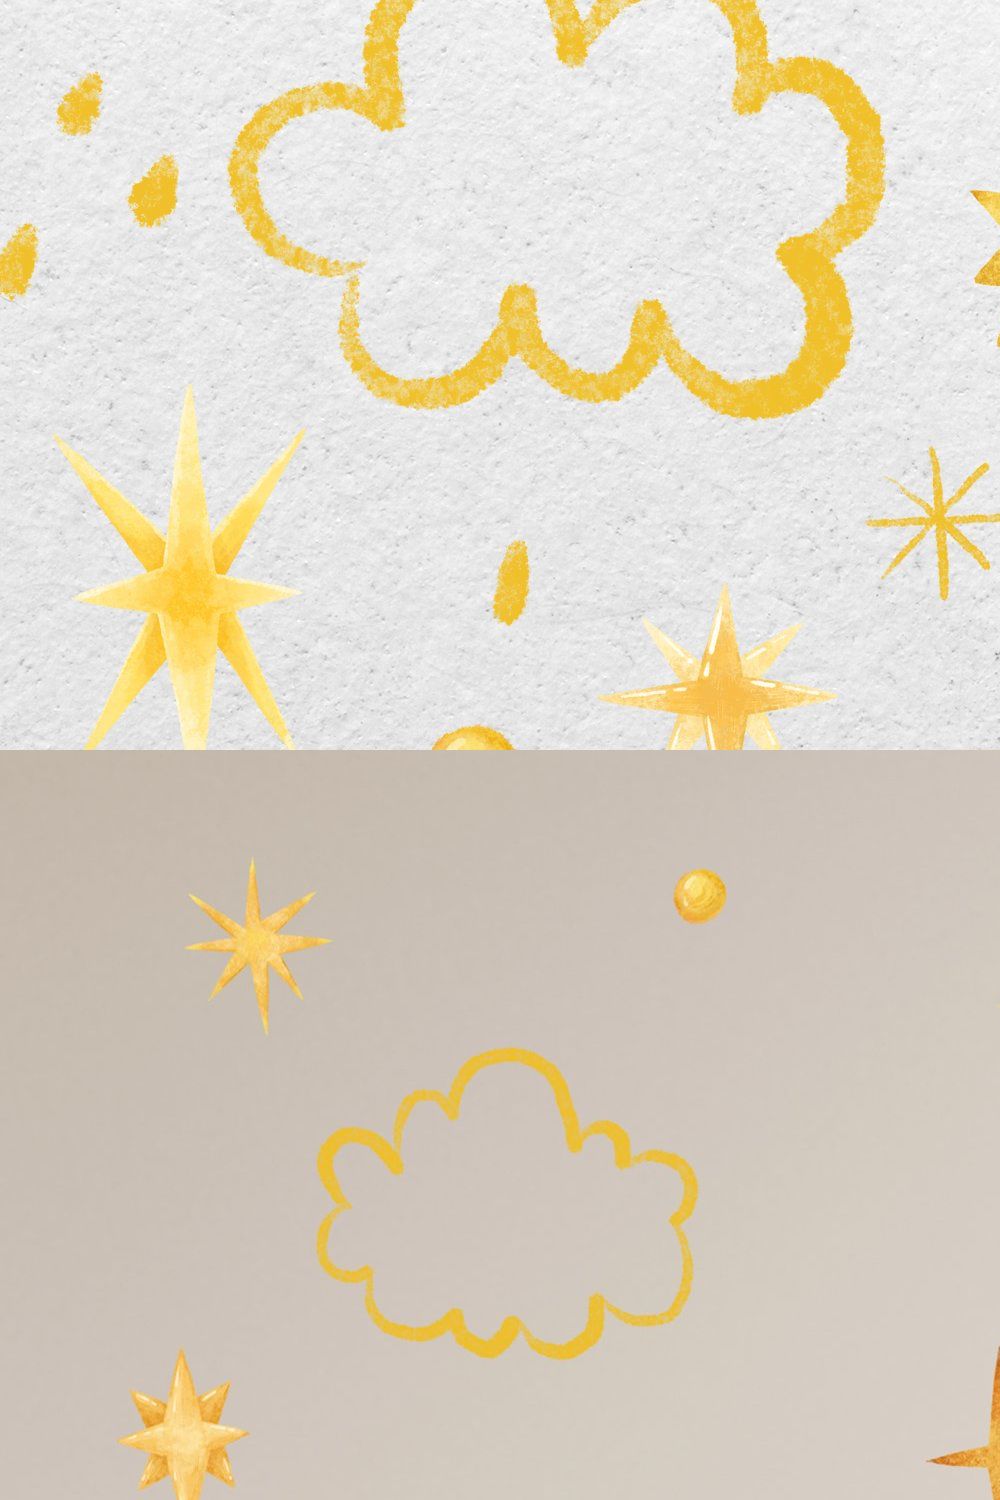 STAR, CLOUDS, SKY CLIPART pinterest preview image.